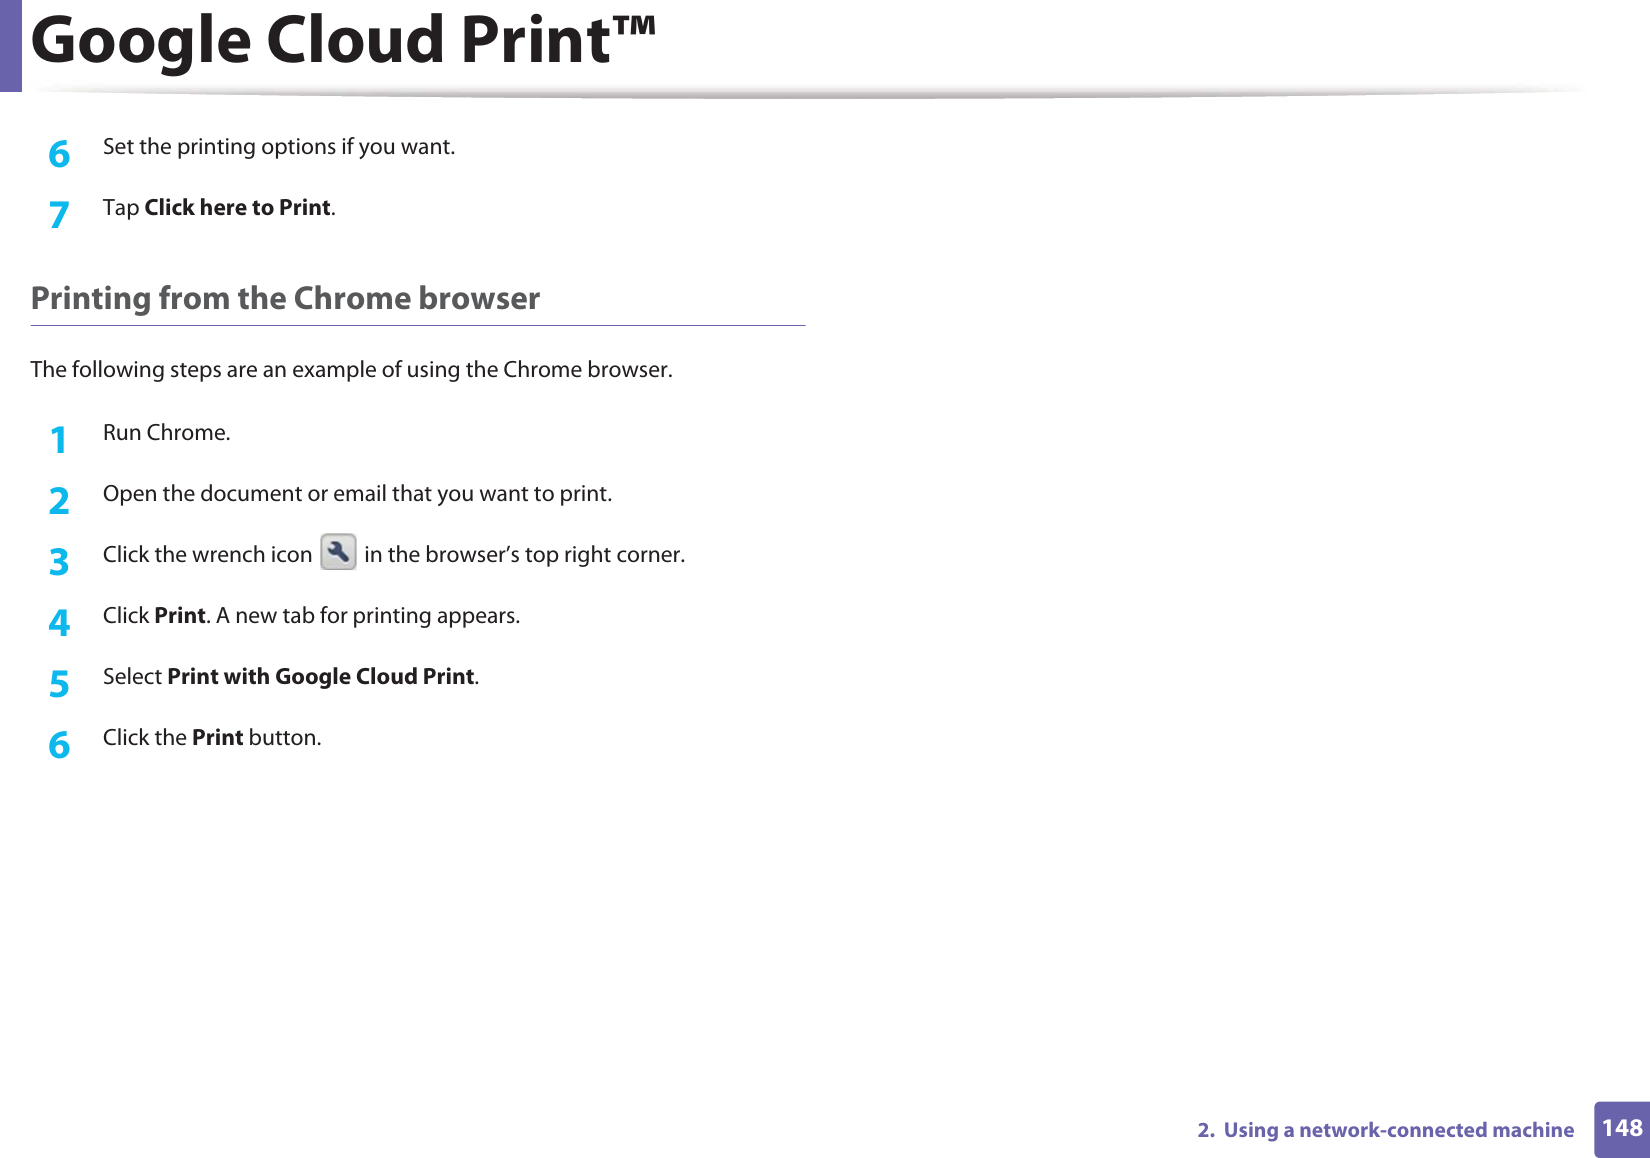 Google Cloud Print™1482.  Using a network-connected machine6  Set the printing options if you want.7  Tap Click here to Print.Printing from the Chrome browserThe following steps are an example of using the Chrome browser.1Run Chrome.2  Open the document or email that you want to print.3  Click the wrench icon   in the browser’s top right corner.4  Click Print. A new tab for printing appears.5  Select Print with Google Cloud Print.6  Click the Print button.